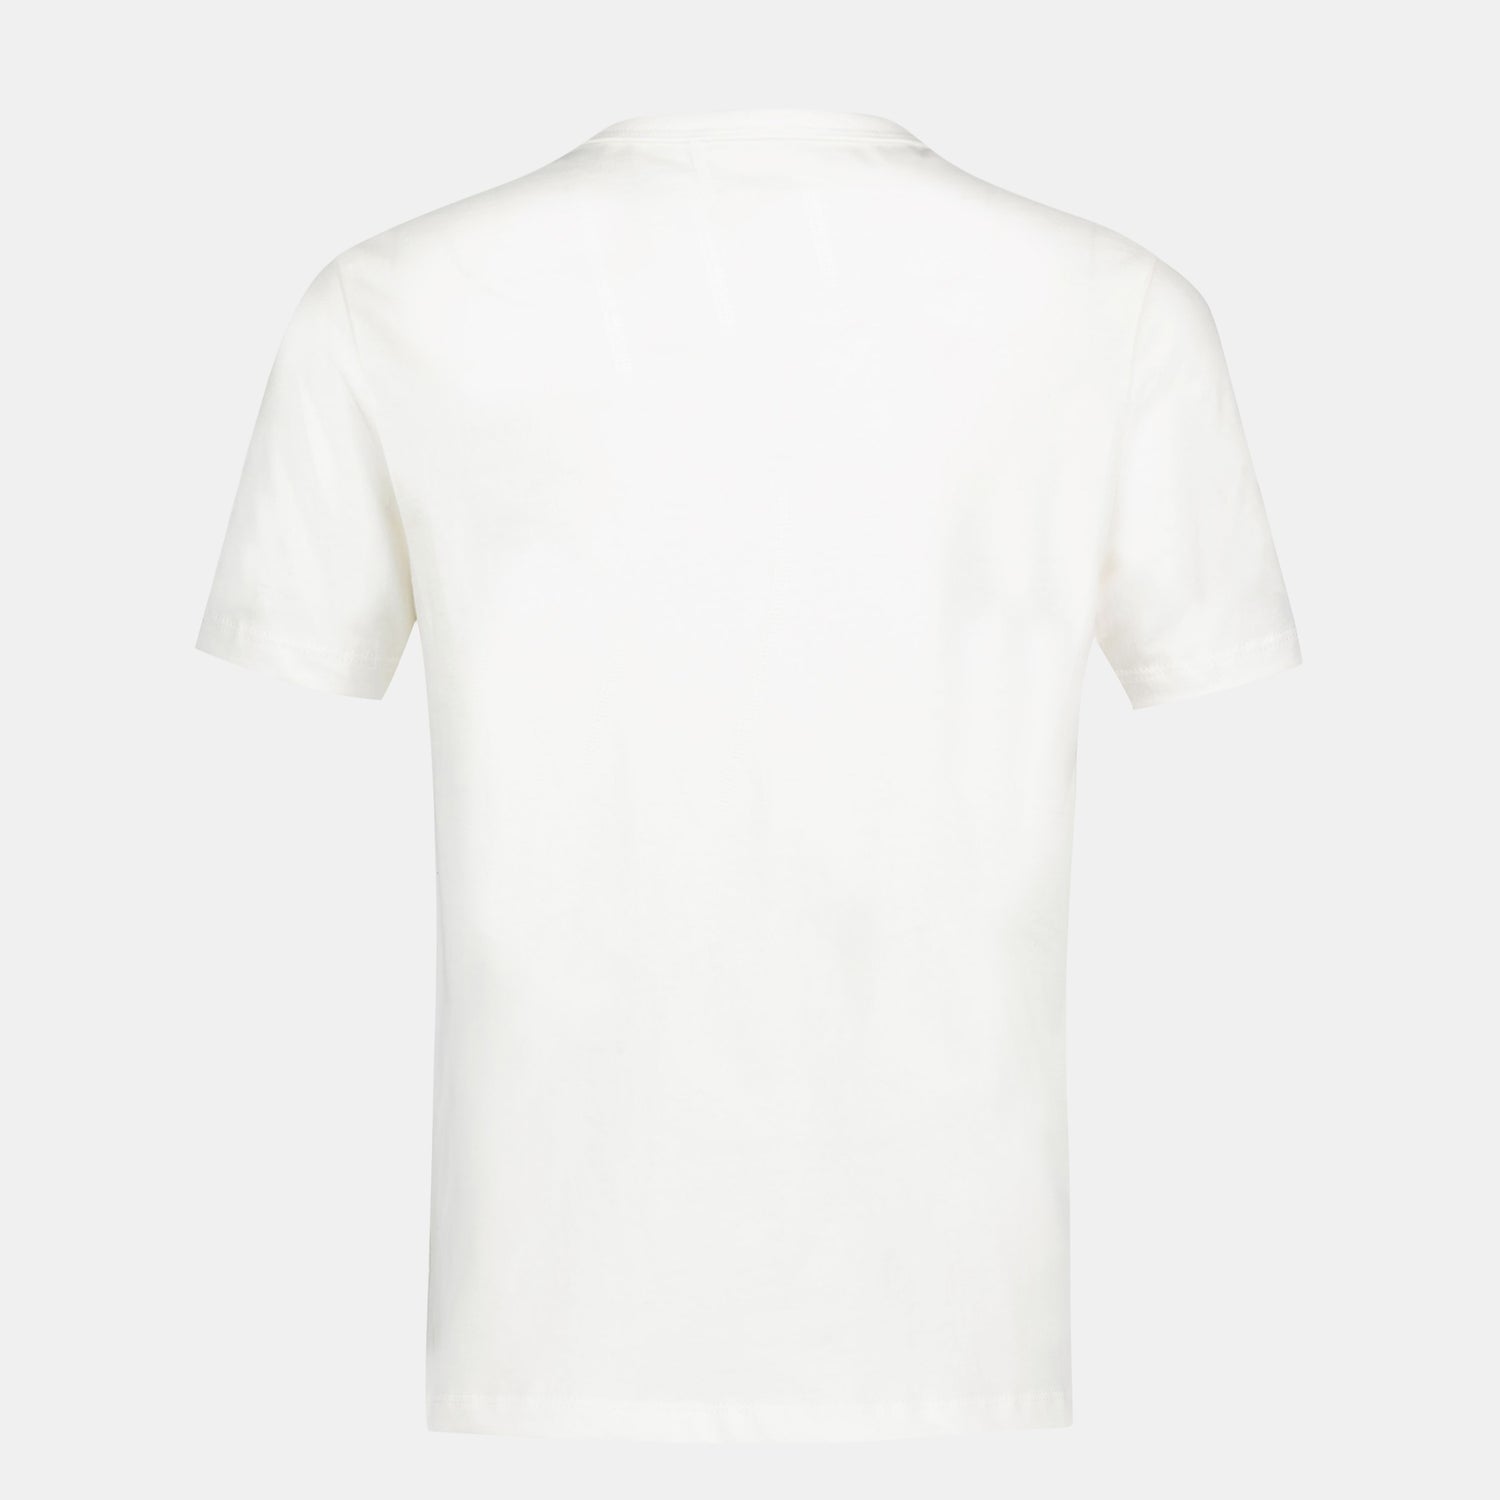 2410087-EFRO 24 Tee SS N°1 Enfant marshmallow  | T-Shirt for kids